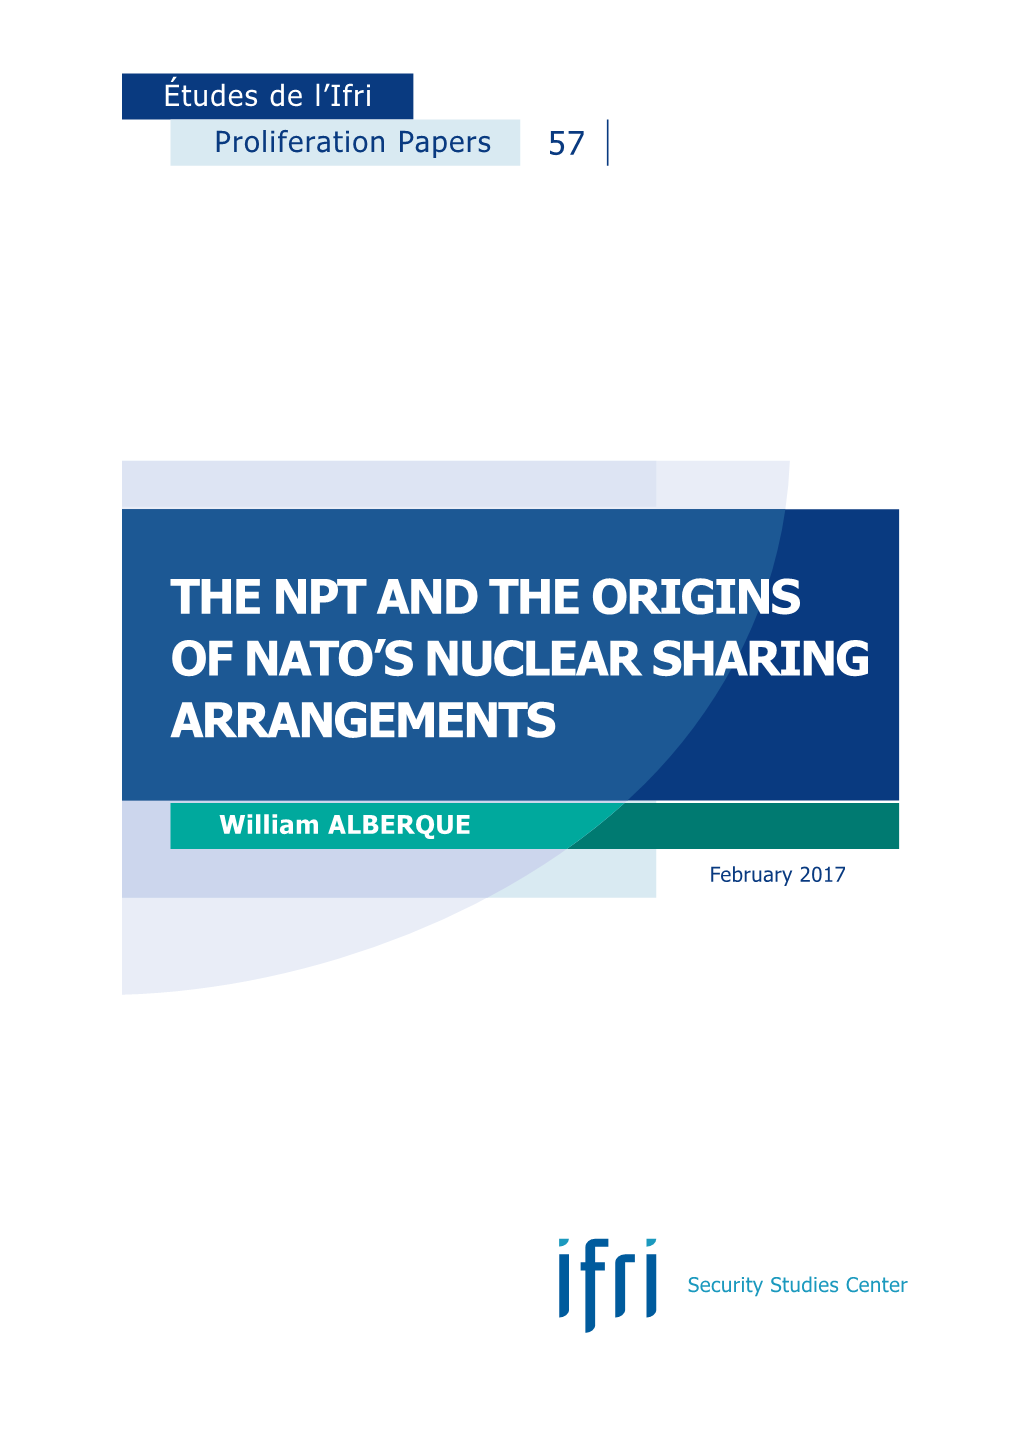 William Alberque “The NPT and the Origins of NATO's Nuclear Sharing Arrangements”